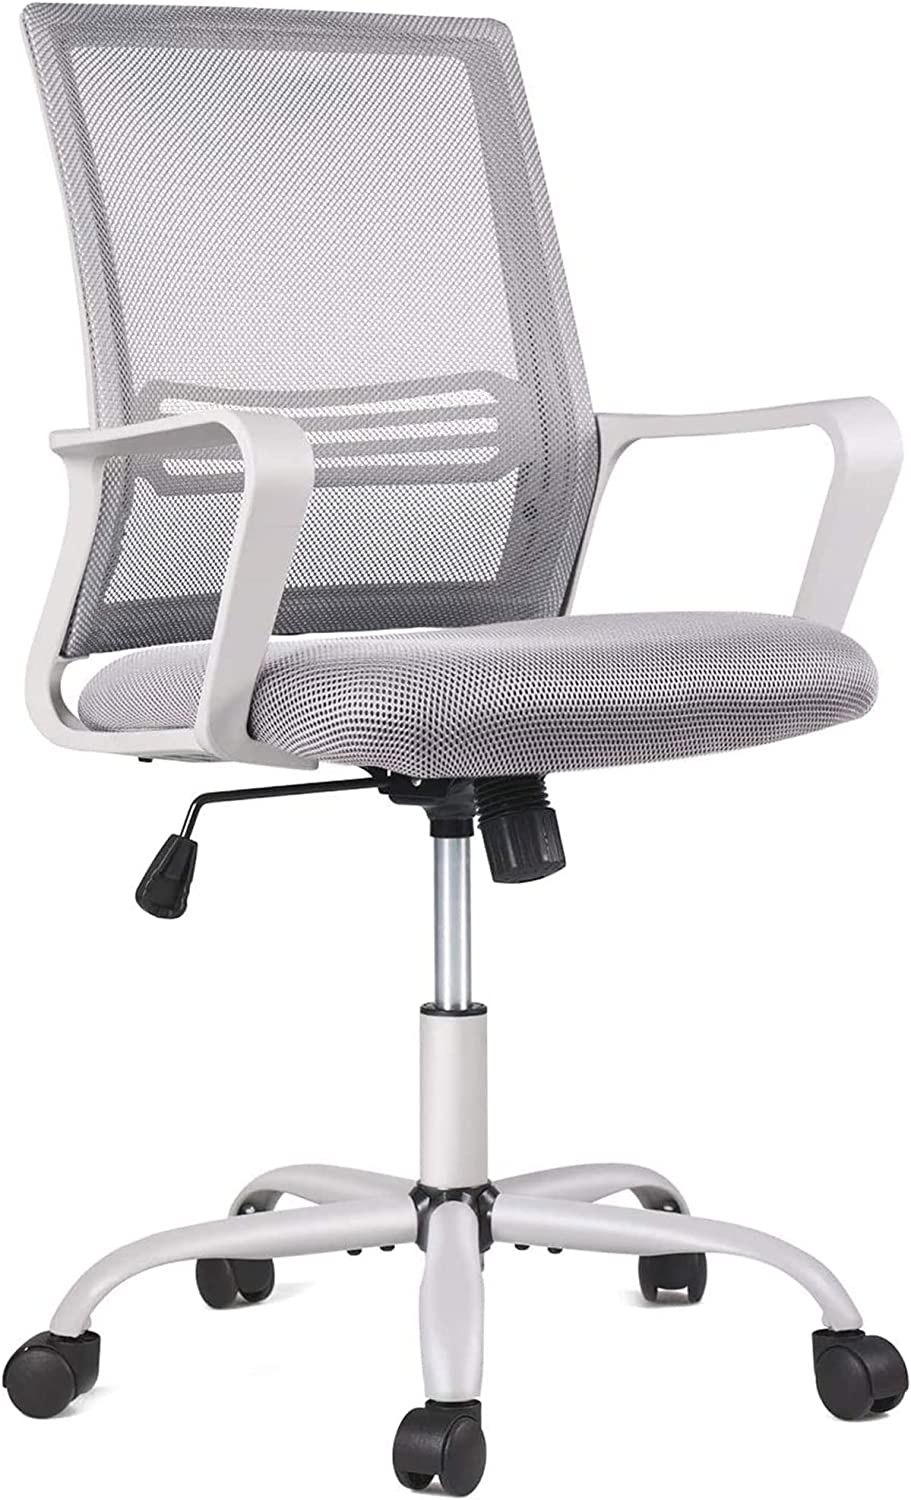 https://shopmarrens.com/wp-content/uploads/2023/01/Smugdesk-Ergonomic-Mid-Back-Breathable-Mesh-Swivel-Desk-Chair-with-Adjustable-Height-and-Lumbar-Support-Armrest-for-Home-Office-and-Study-Gray.jpg